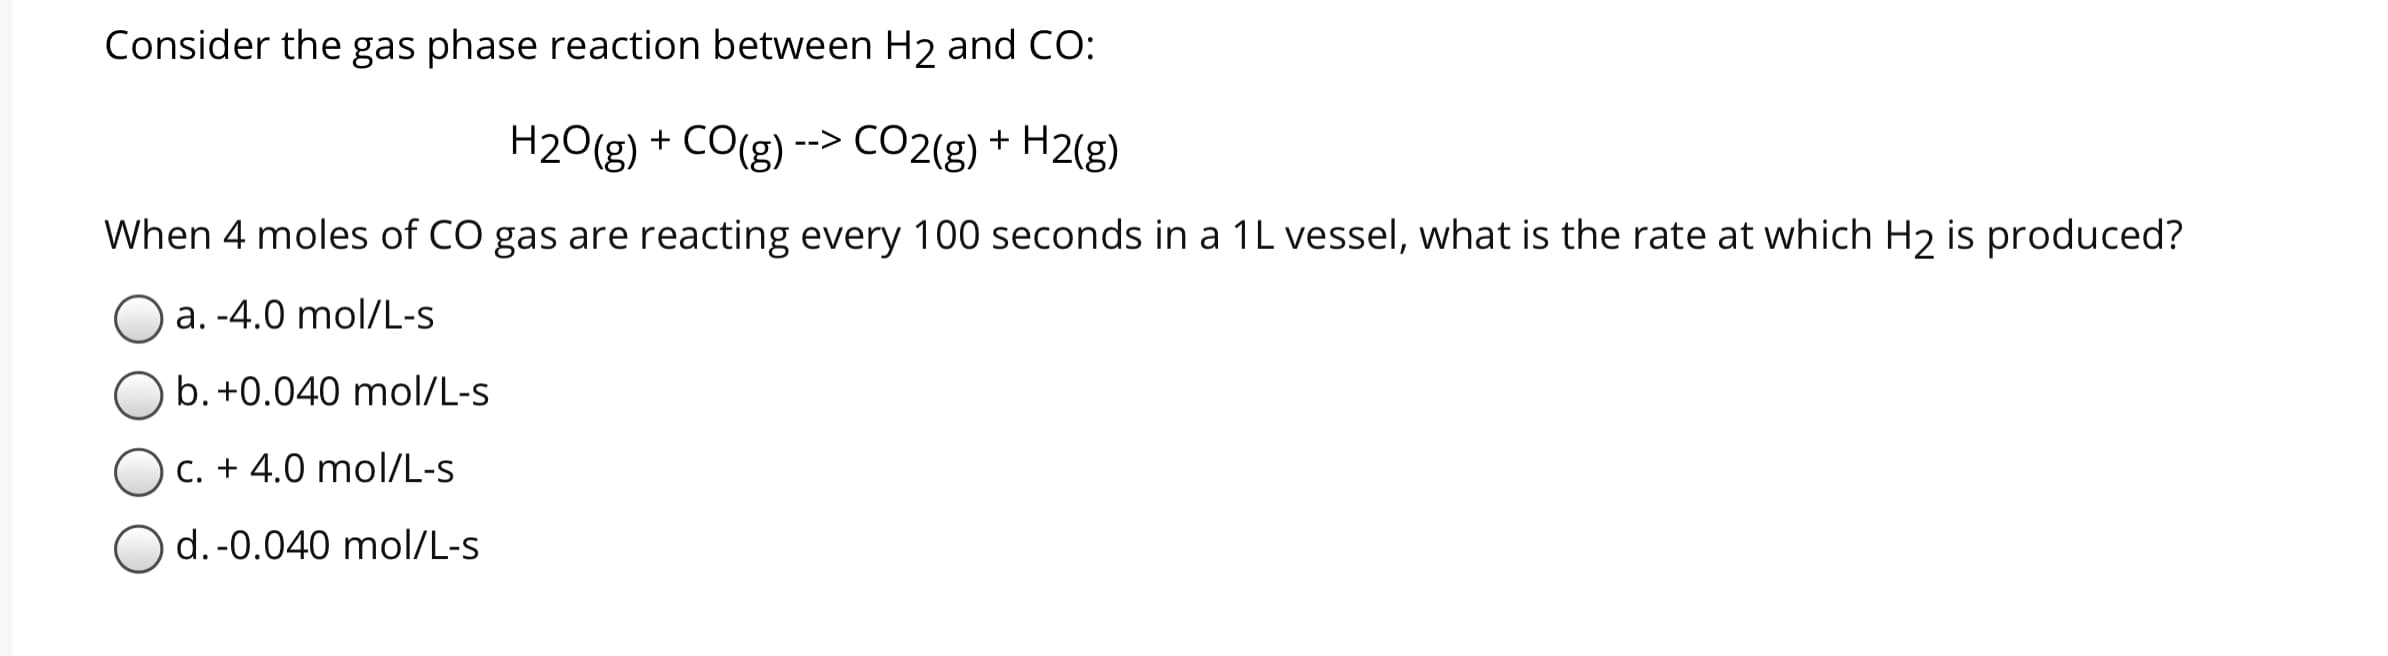 Consider the gas phase reaction between H2 and CO:
H2O(g) + CO(g)
CO2(g) + H2(g)
-->
When 4 moles of CO gas are reacting every 100 seconds in a 1L vessel, what is the rate at which H2 is produced?
a. -4.0 mol/L-S
b. +0.040 mol/L-s
C. + 4.0 mol/L-s
d.-0.040 mol/L-s
